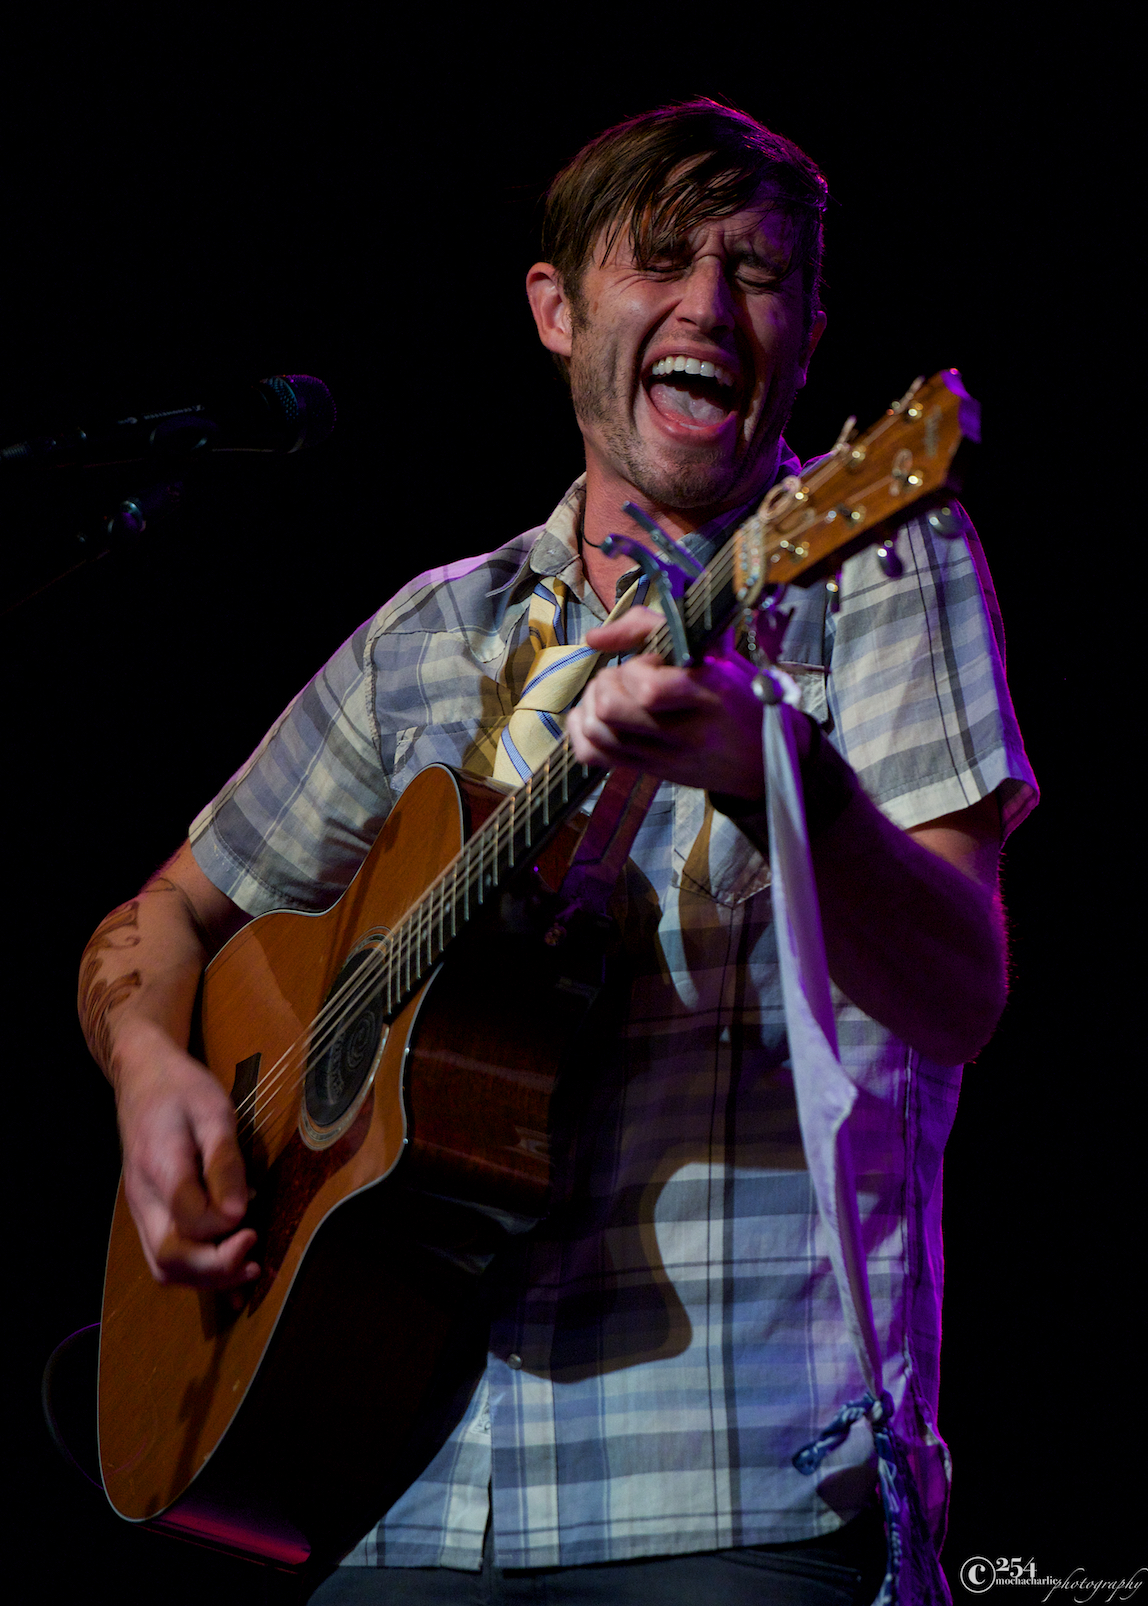 Levi Ware at The Triple Door (Photo by Mocha Charlie)